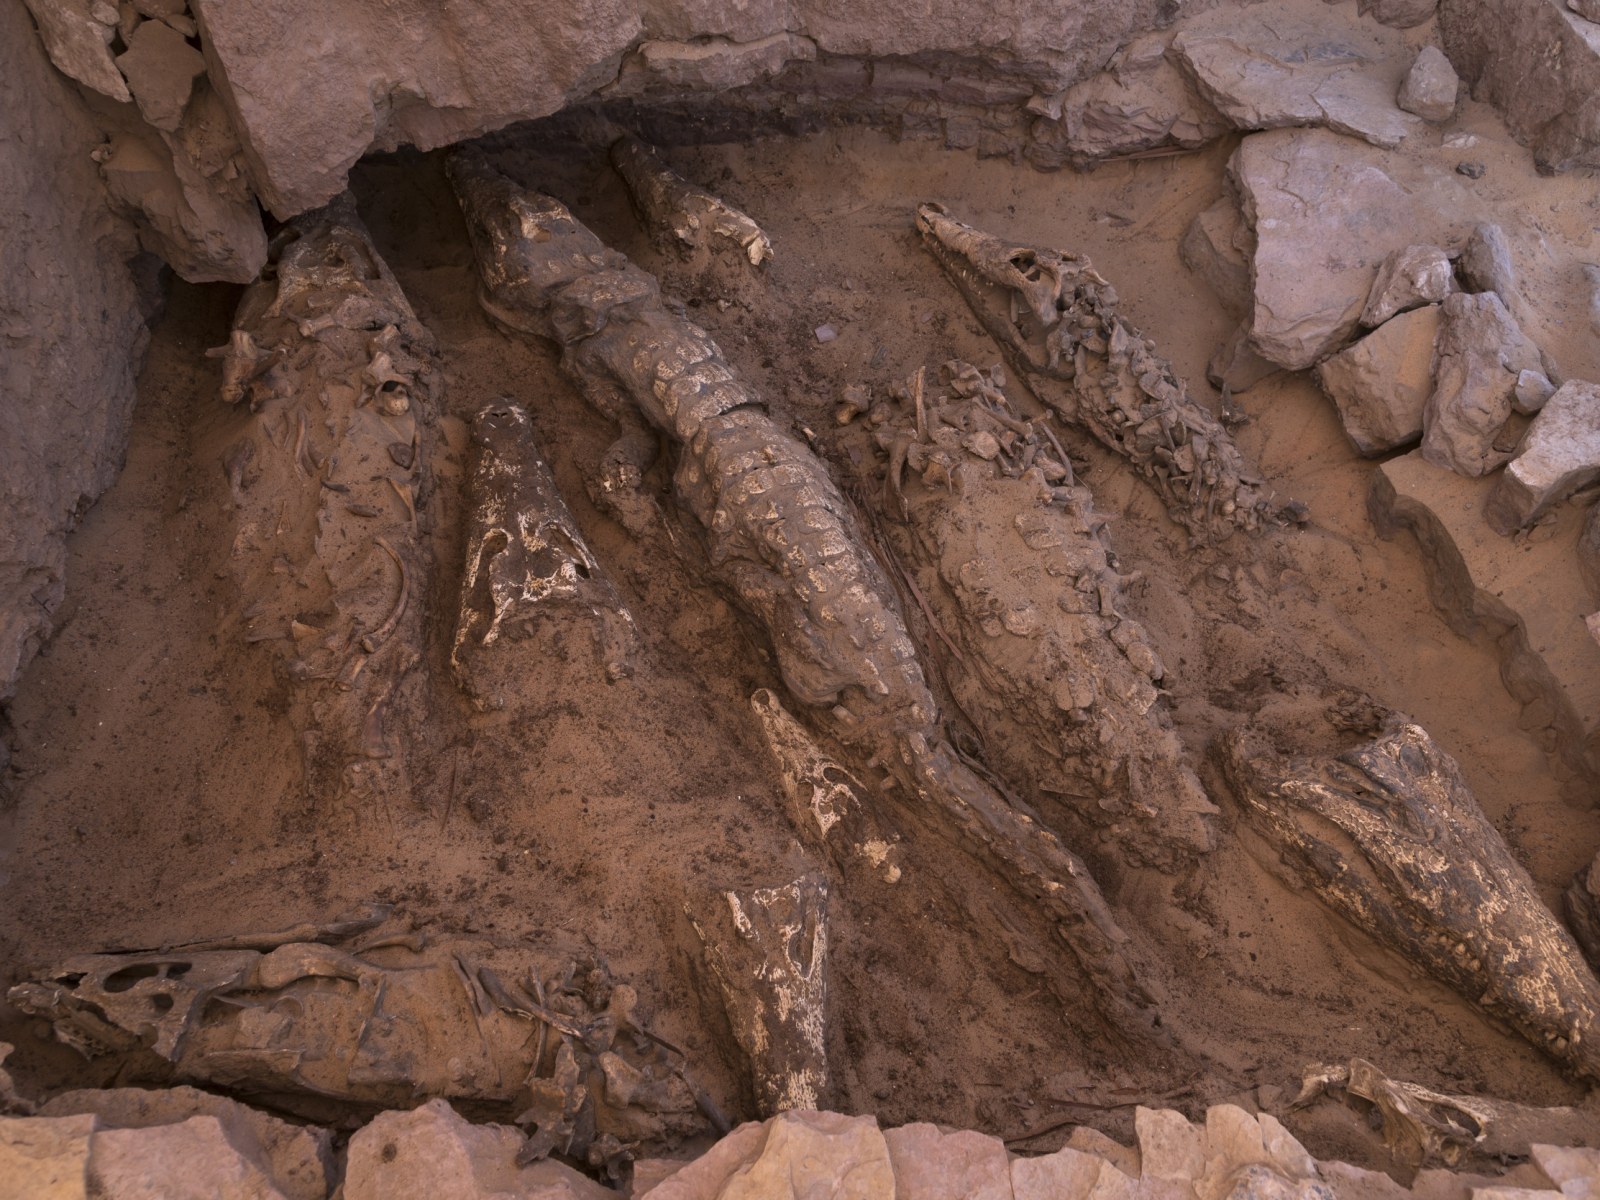 Decapitated Mummified Crocodiles Discovered in Undisturbed Ancient Tomb